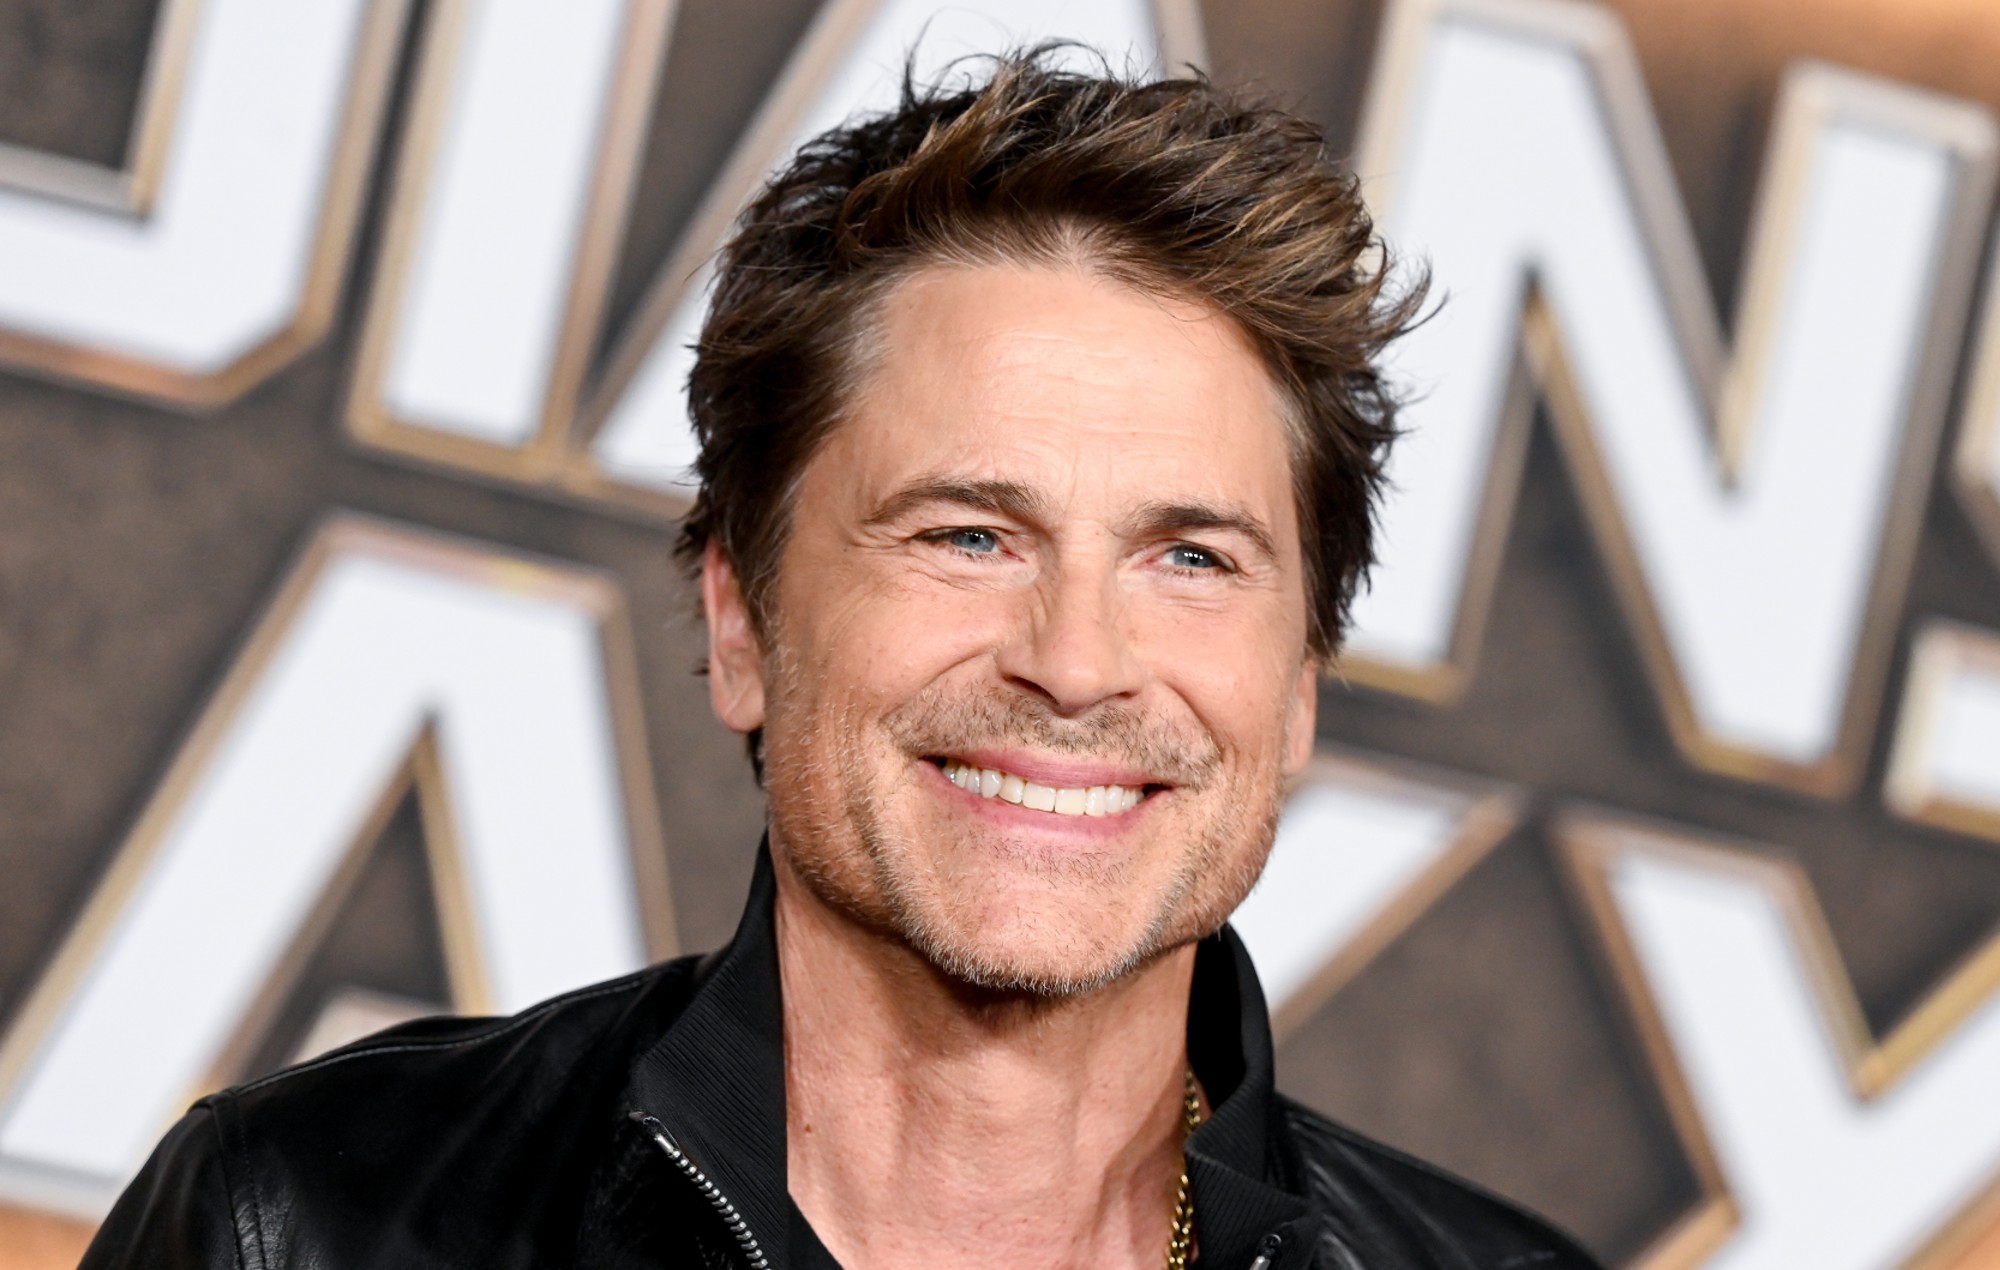 Rob Lowe says his relationship with 'The West Wing' was "super unhealthy"